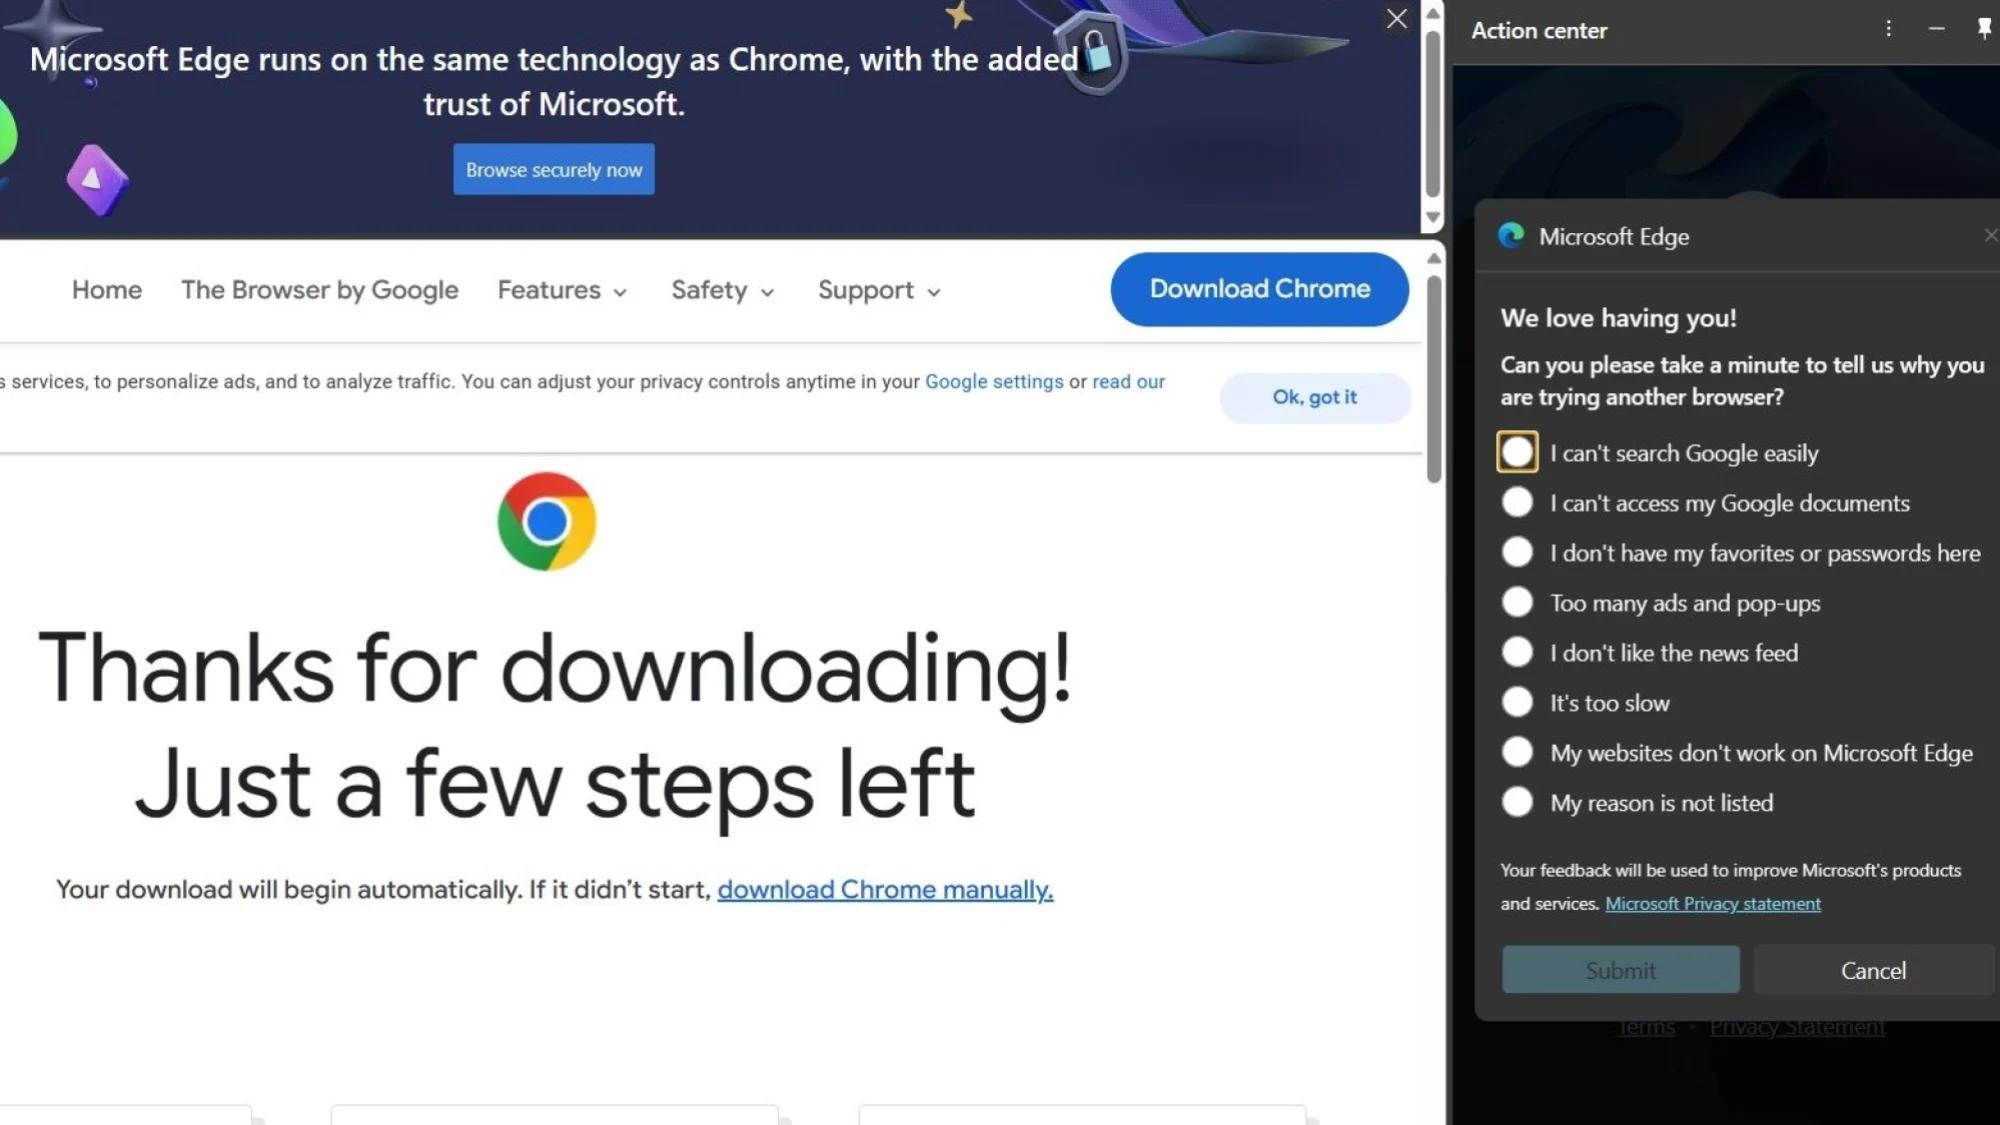 Google Chrome users: Microsoft Edge wants to know why you don’t want it